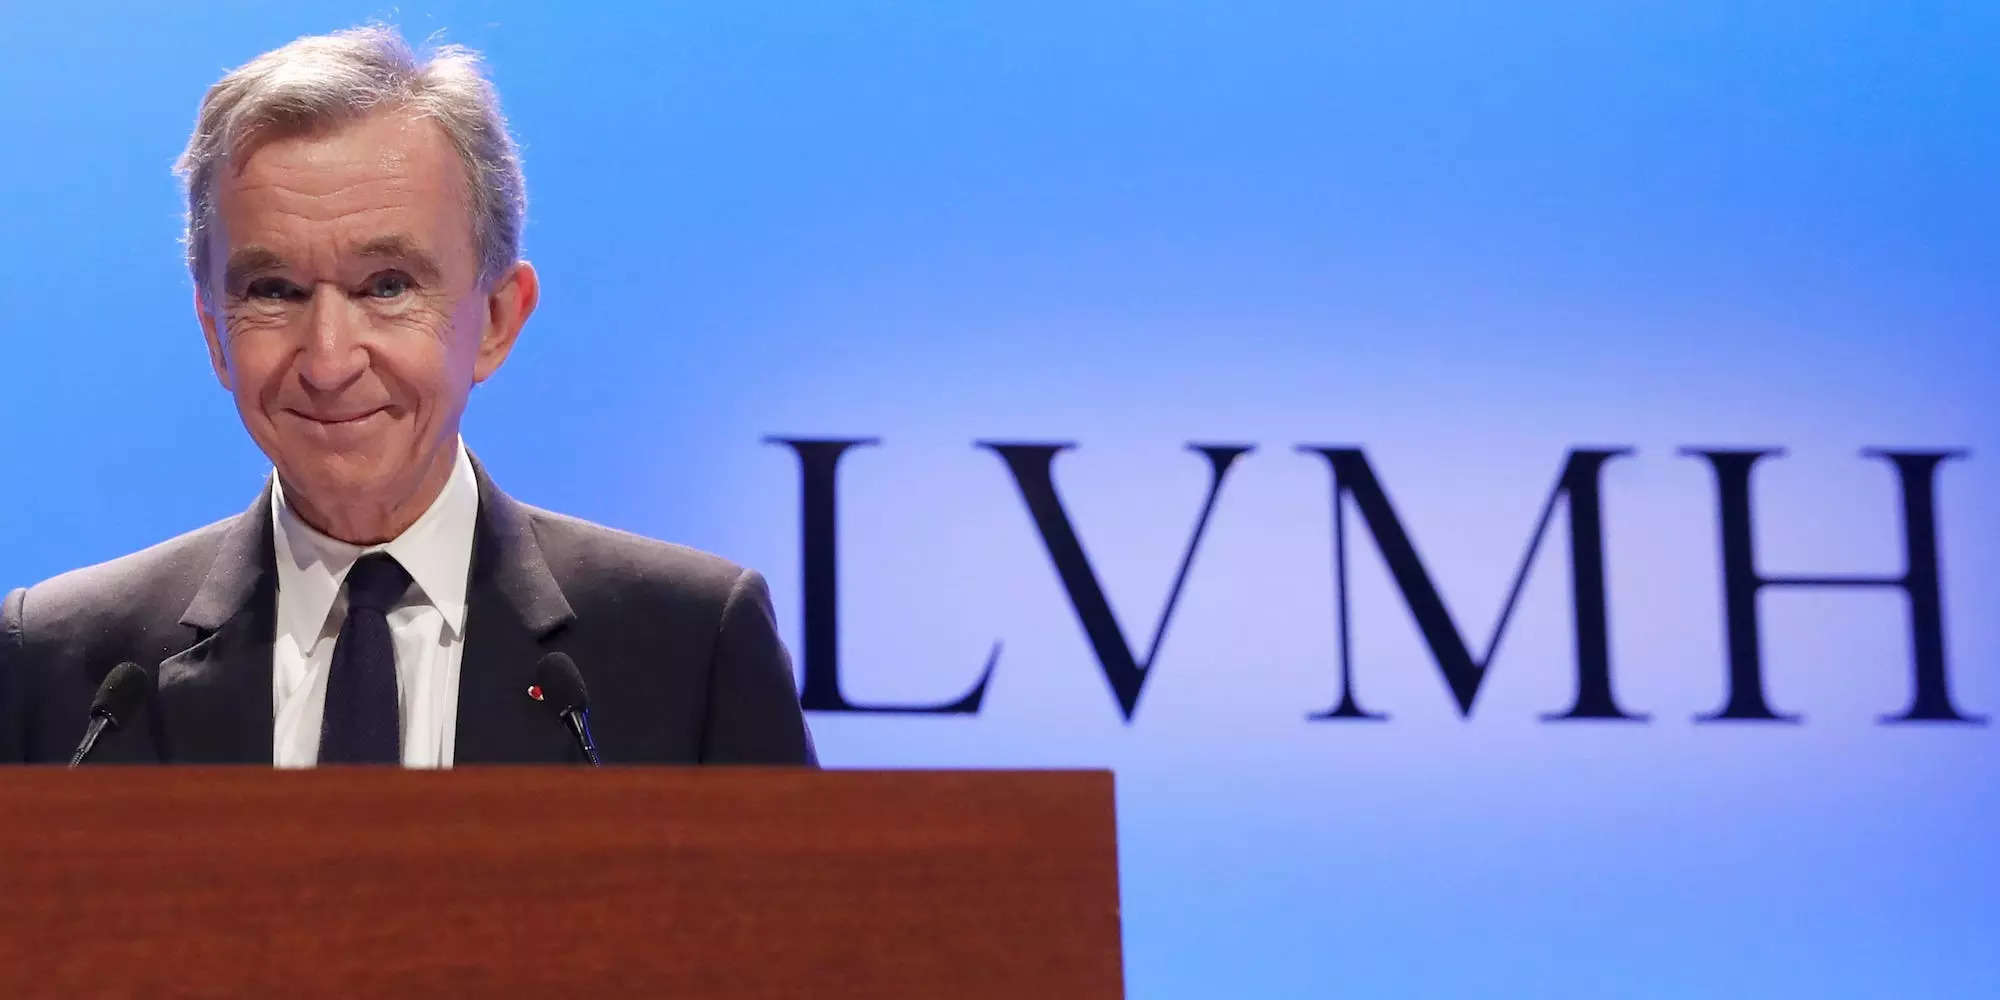 LVMH Head Office Raids Quashed on 'Unfounded' Suspicions - BNN Bloomberg